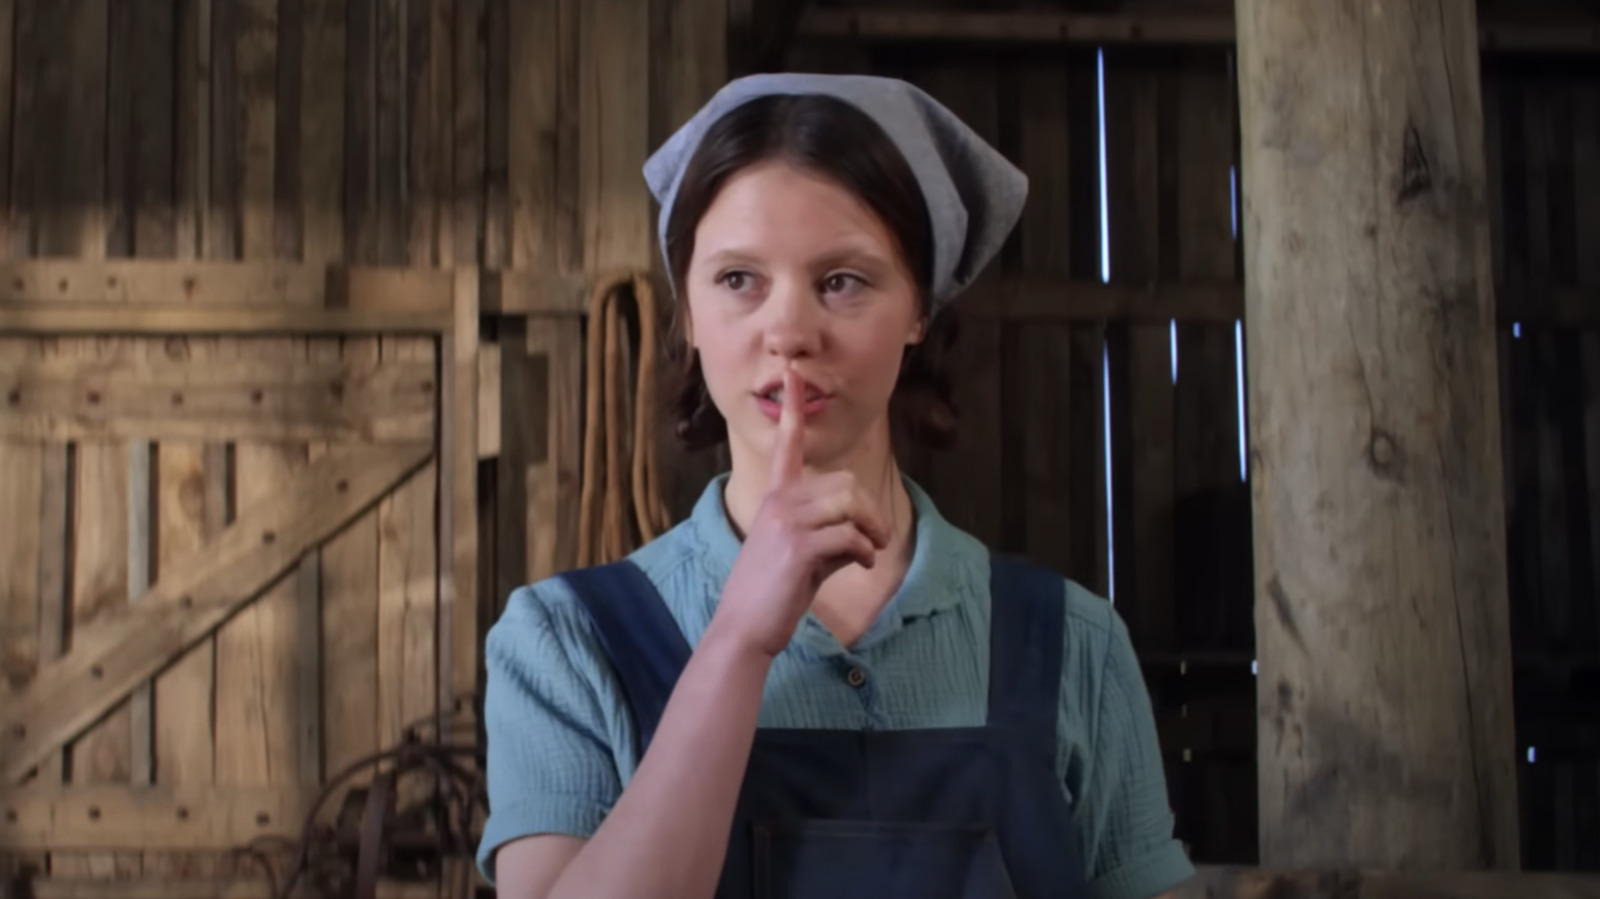 A still from Pearl of Mia Goth as Pearl dressed in farming clothes, putting her finger to her mouth in a shushing gesture